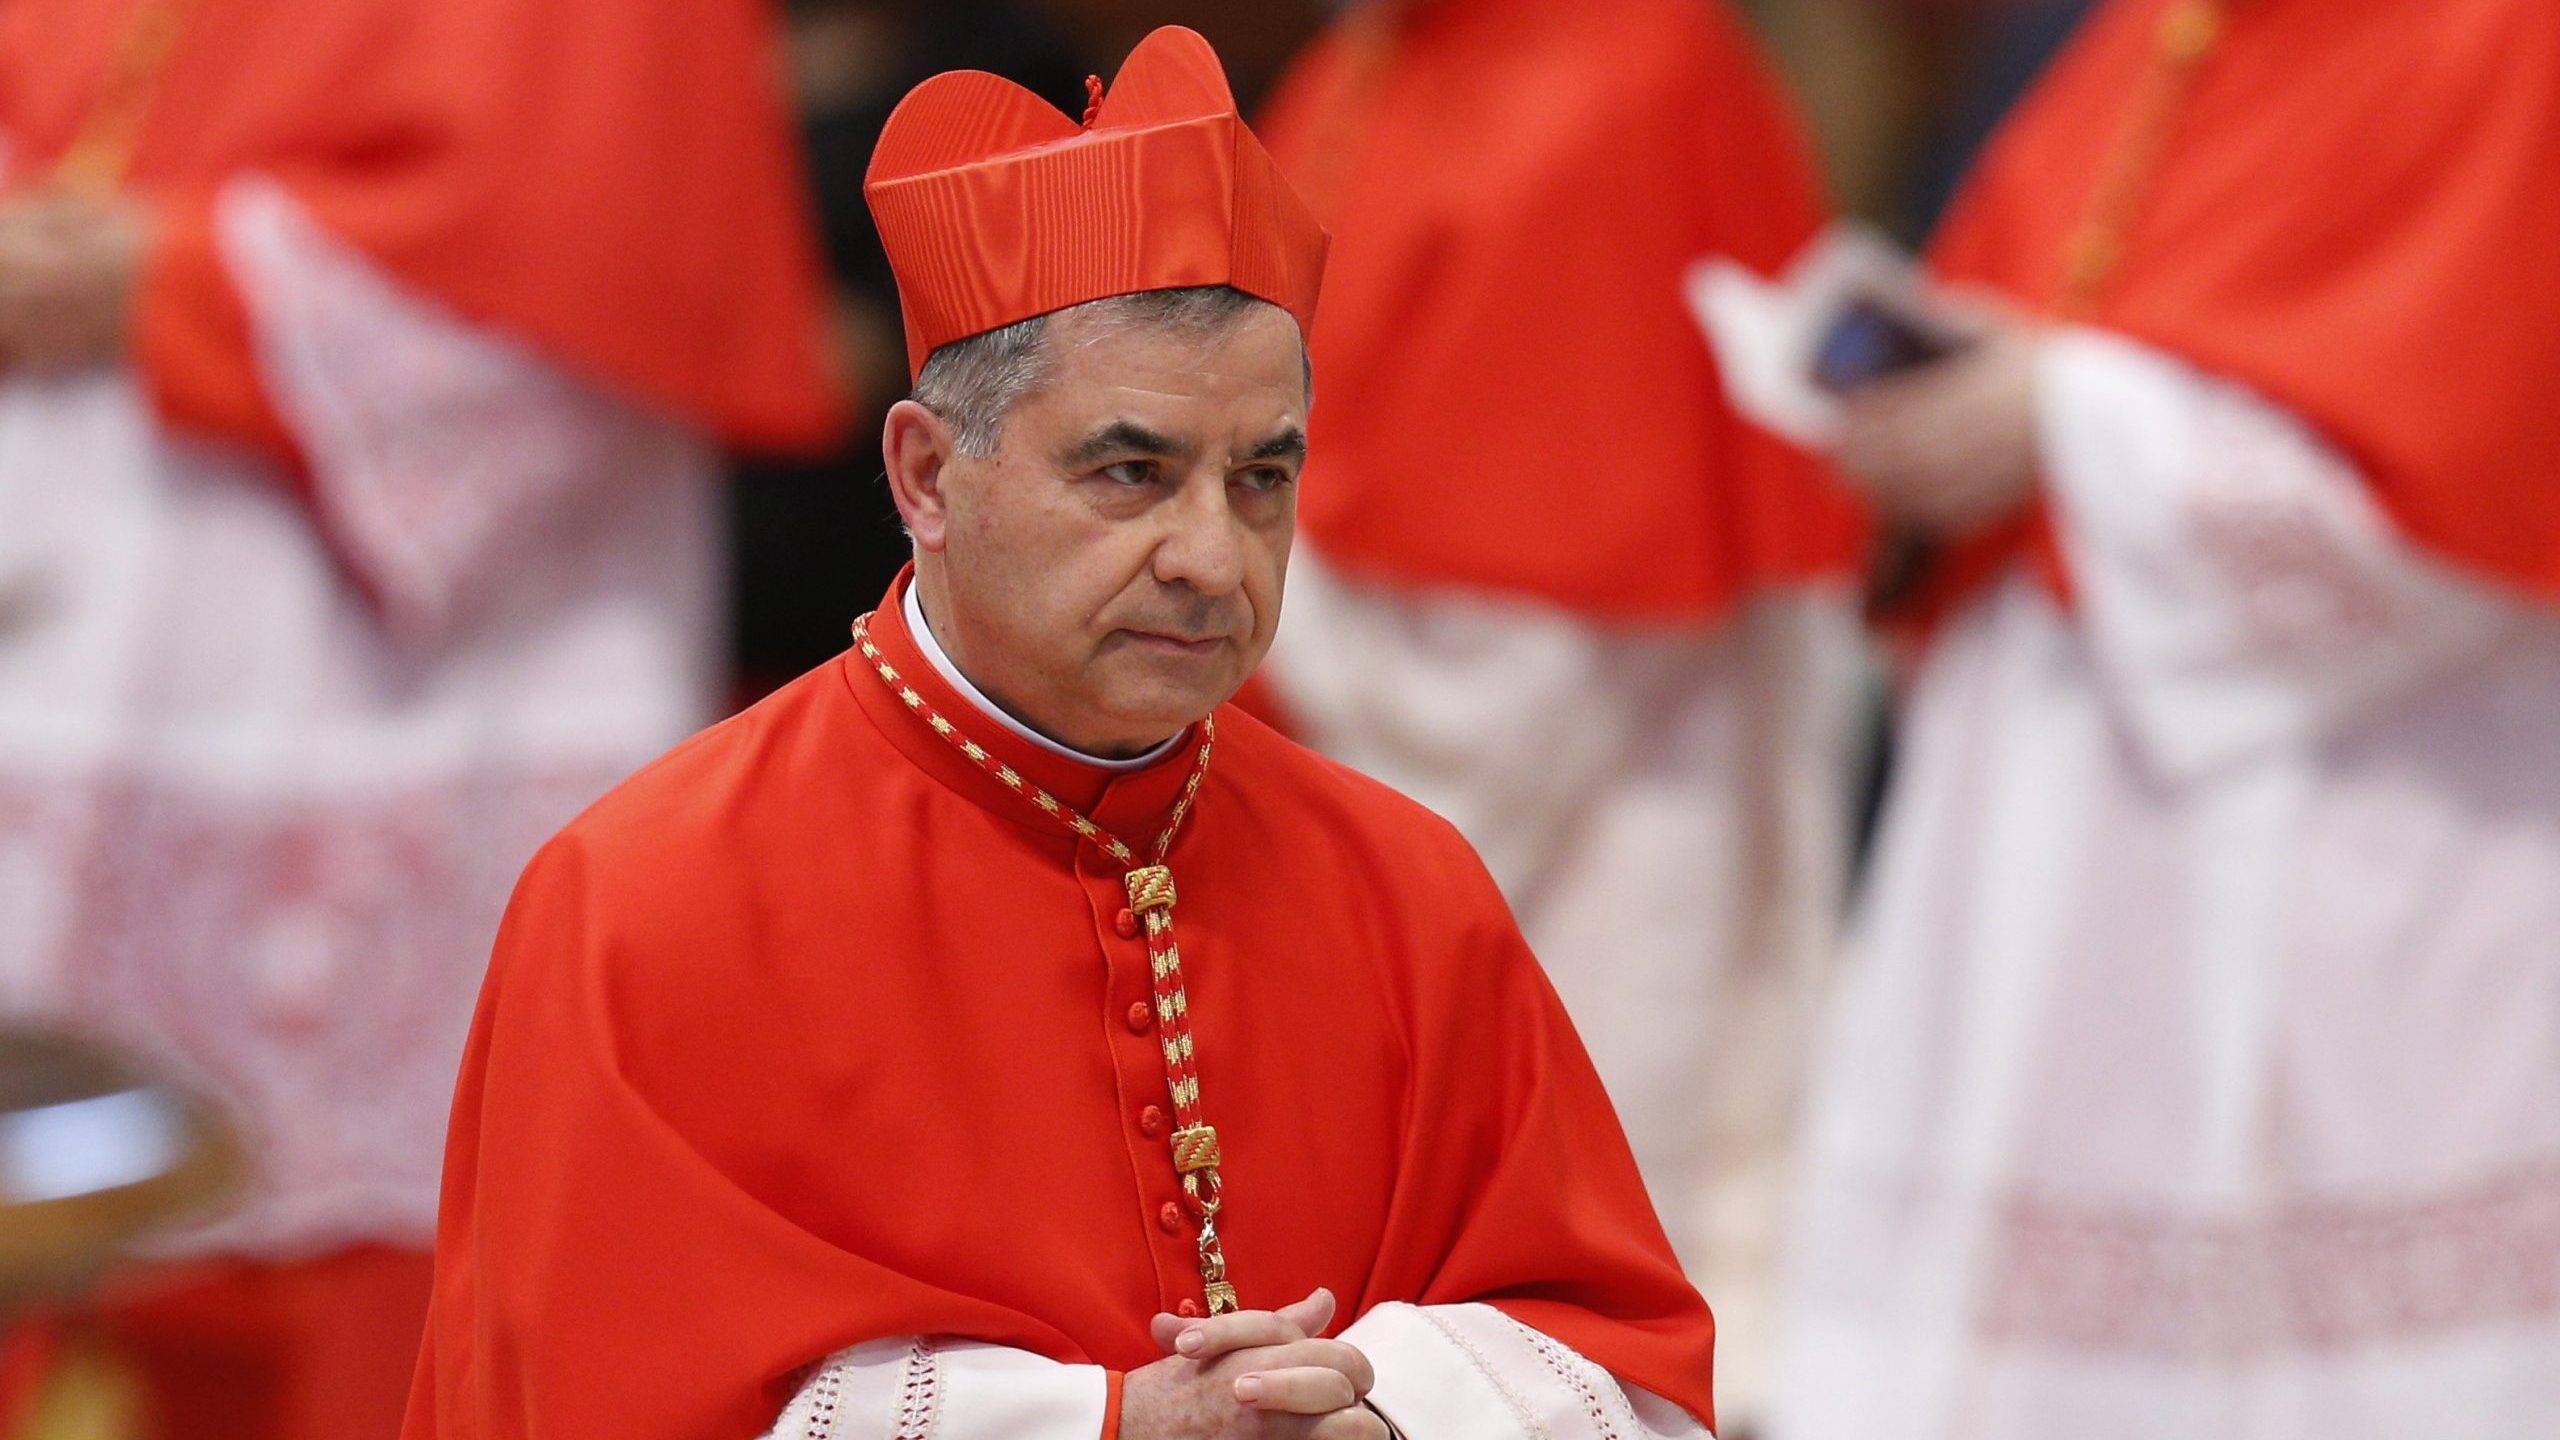 Cardinal at center of Vatican trial claims he has been 'reinstated' by Pope